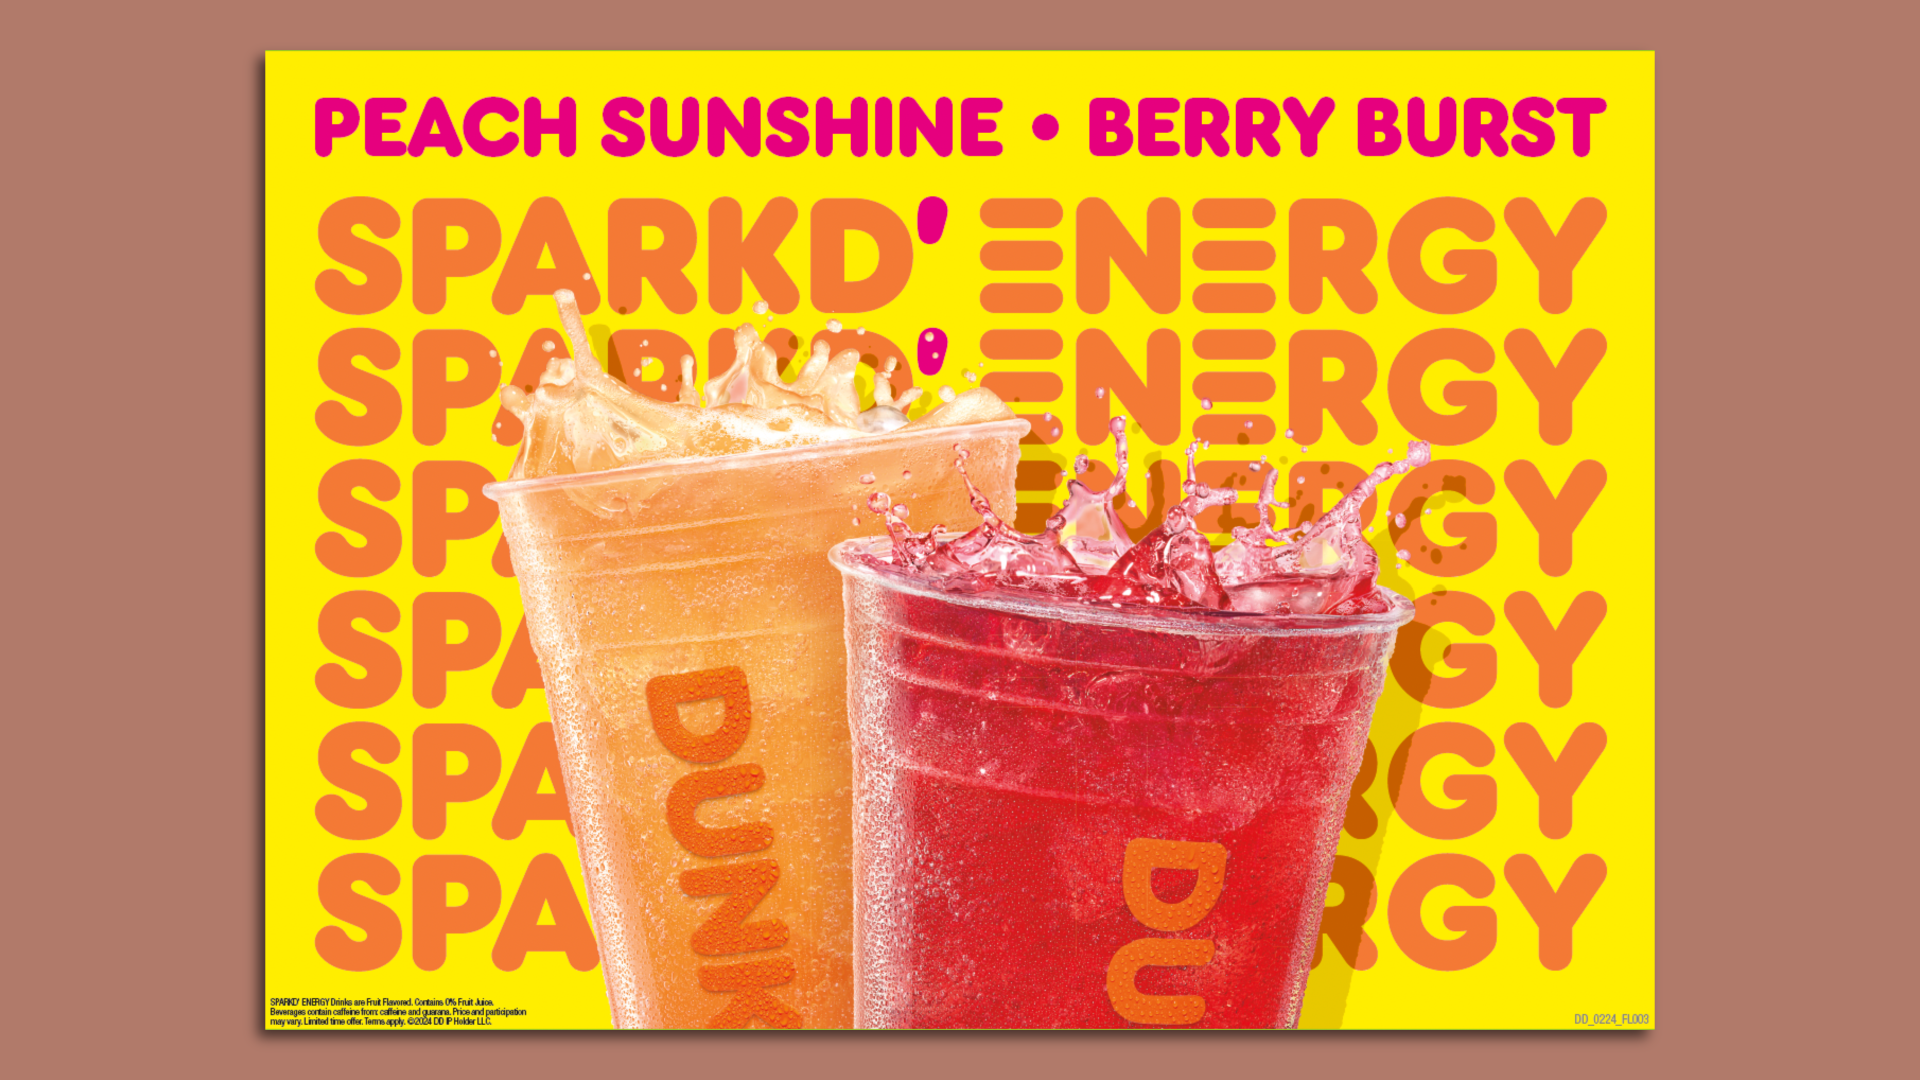 Two Dunkin' cups of SPARKD' Energy drink with words "Peach Sunshine" and "Berry Burst" at top of image